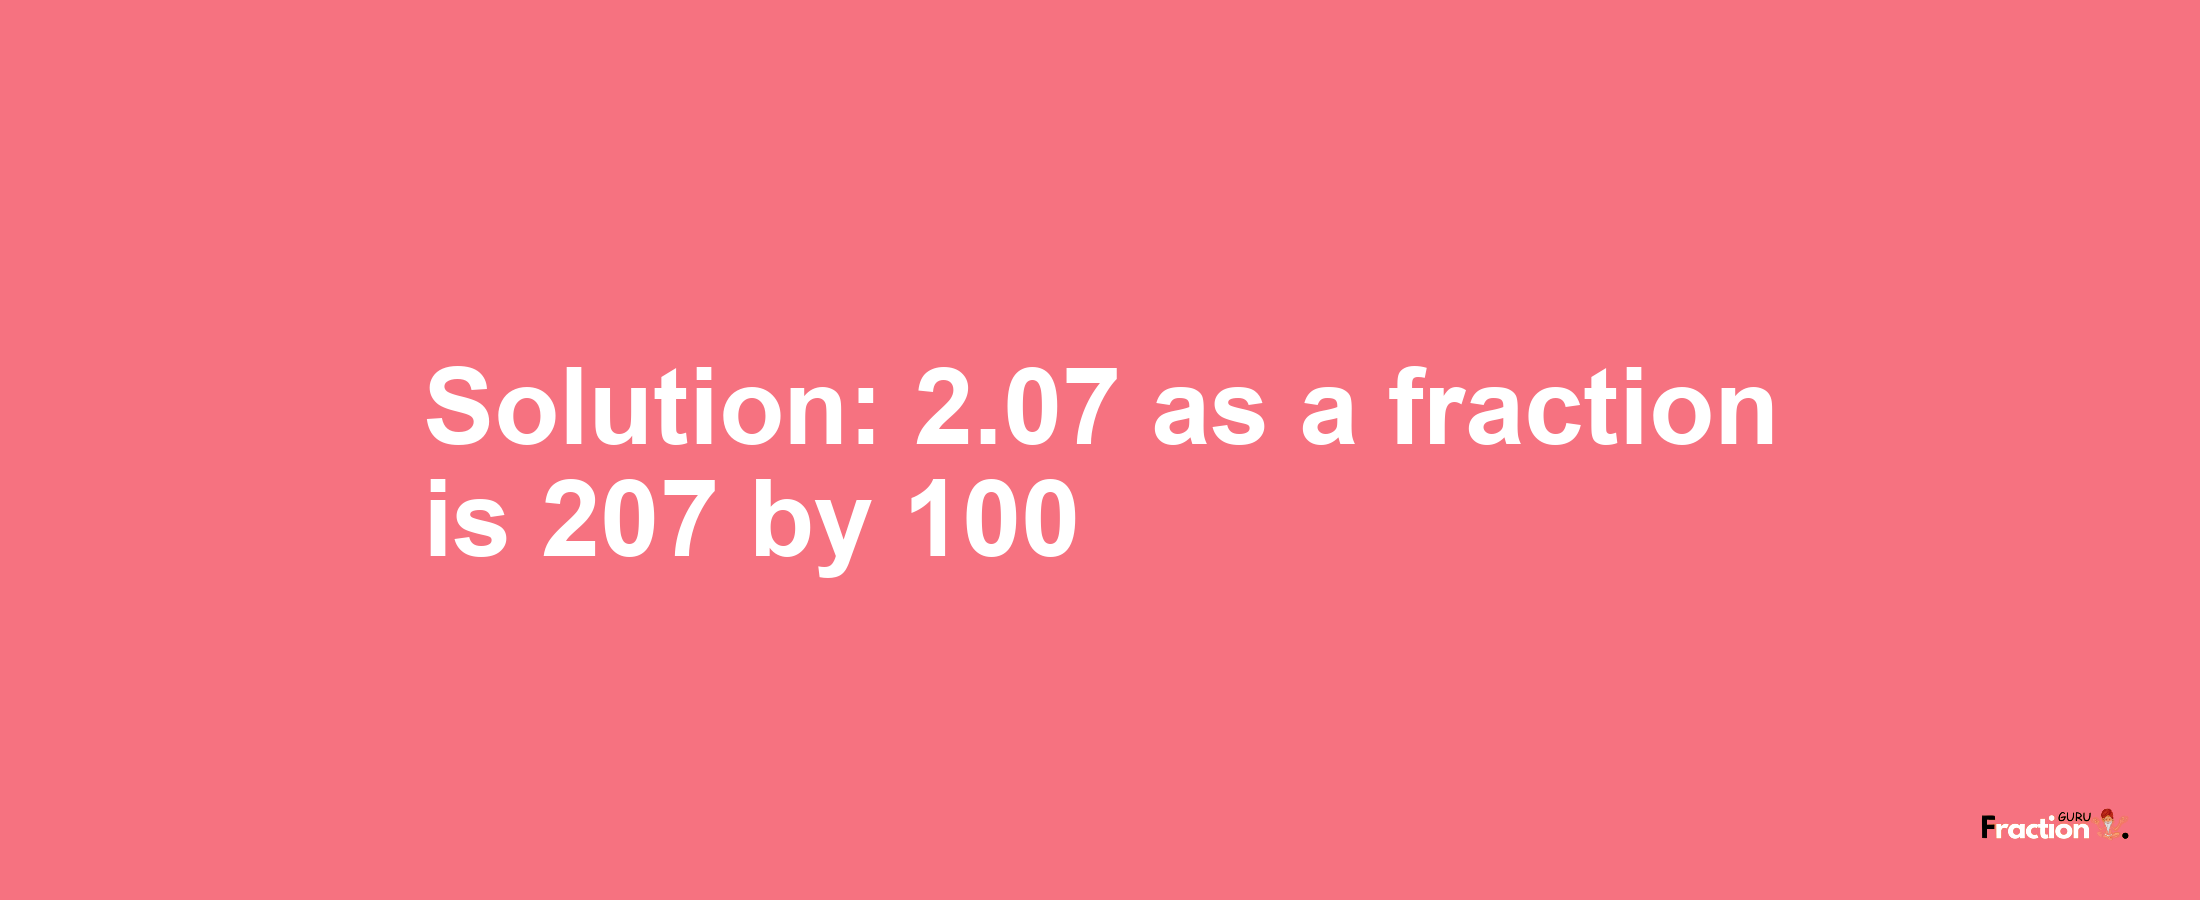 Solution:2.07 as a fraction is 207/100